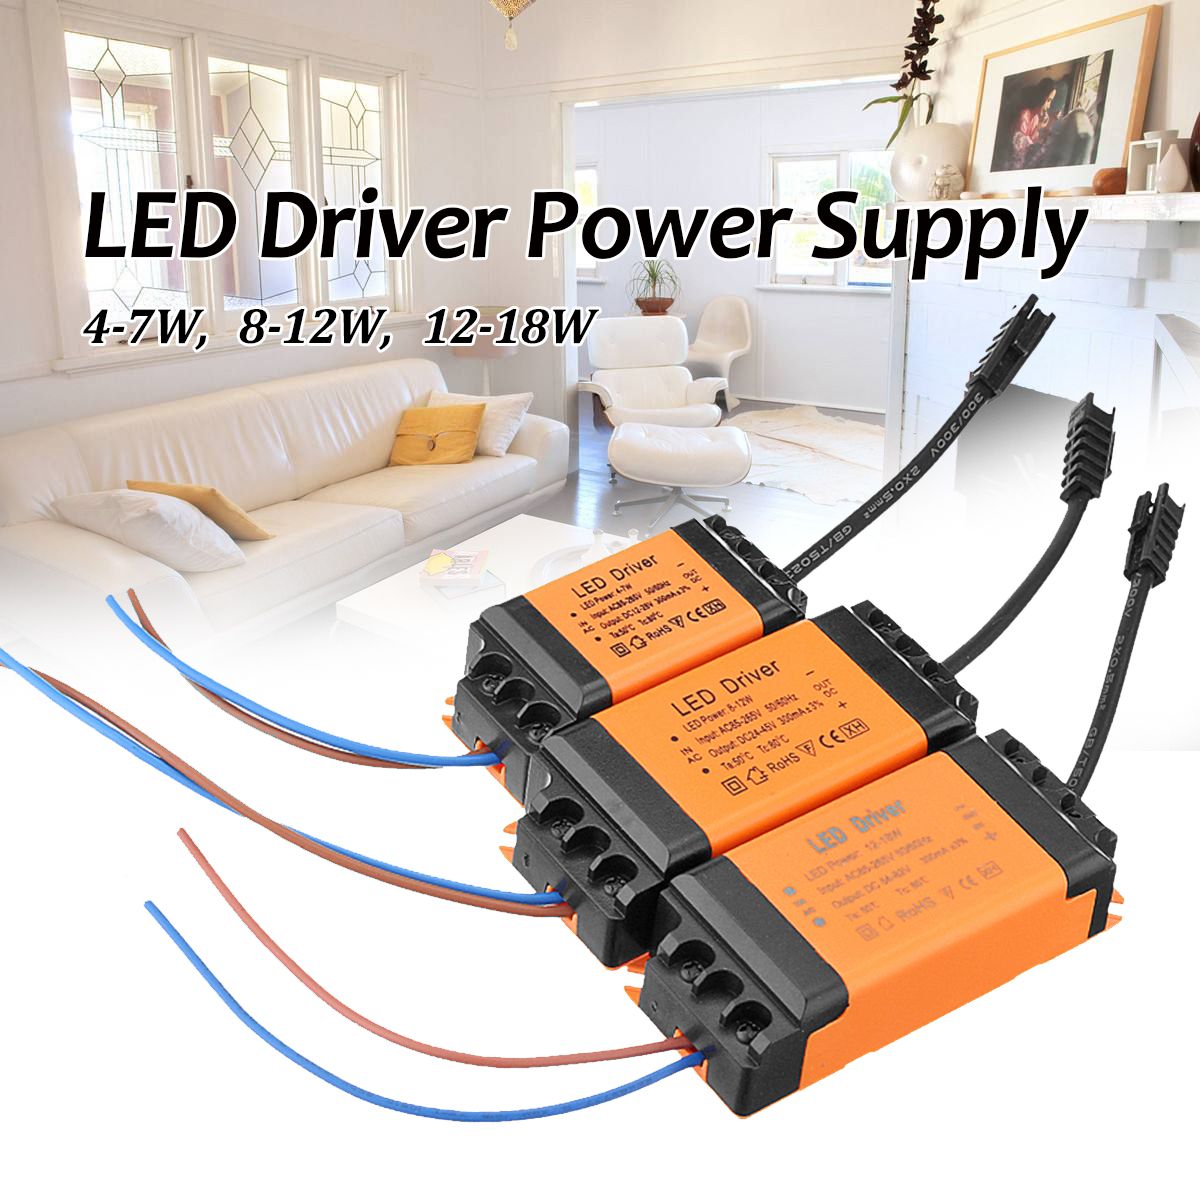 AC85-265V-To-DC12-82V-4-18W-Power-Supply-LED-Driver-Constant-Current-for-Floodlight-Ceiling-Lamp-1367454